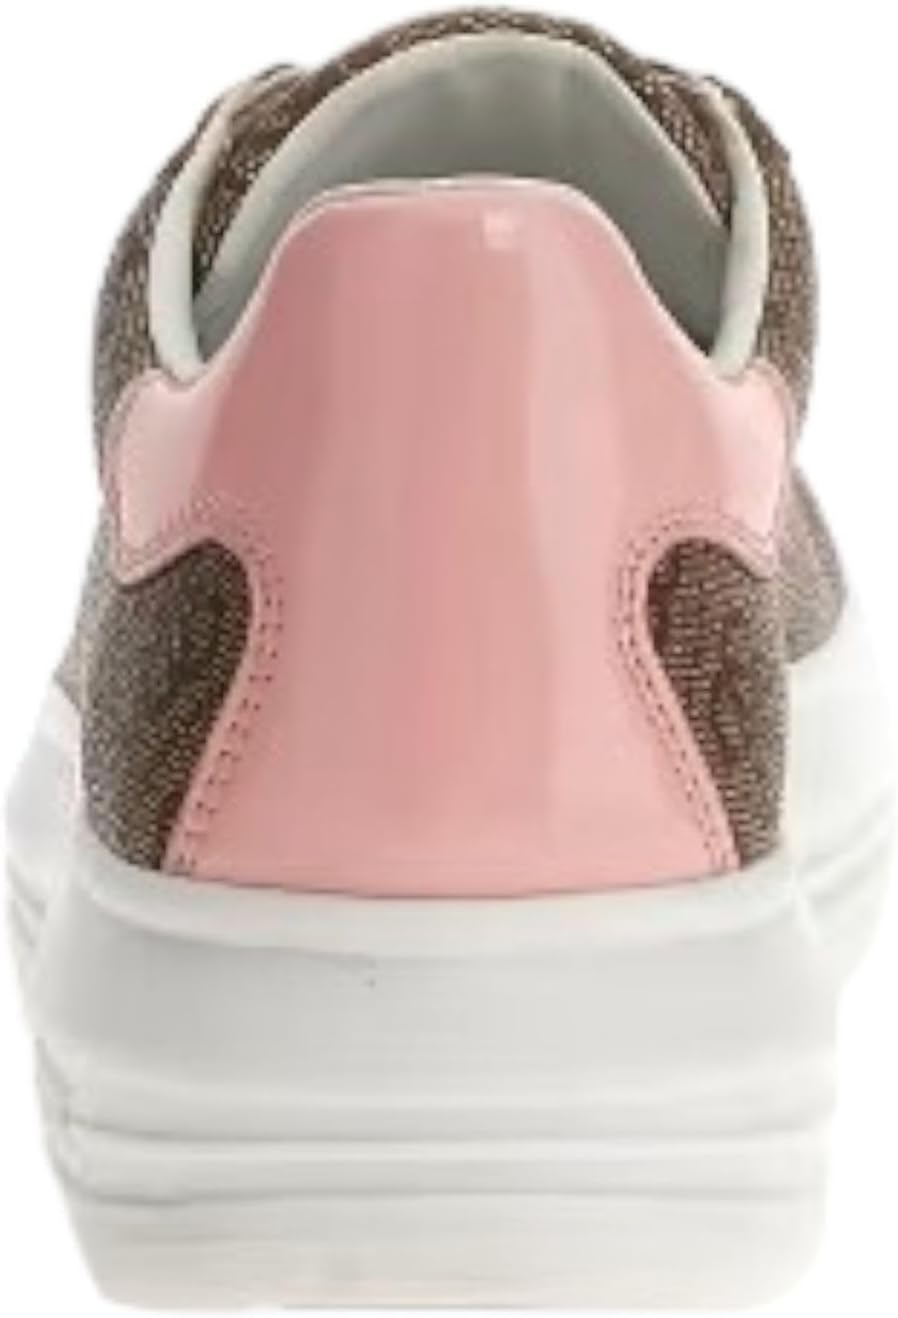 Sneakers Guess Donna Bianco/marrone